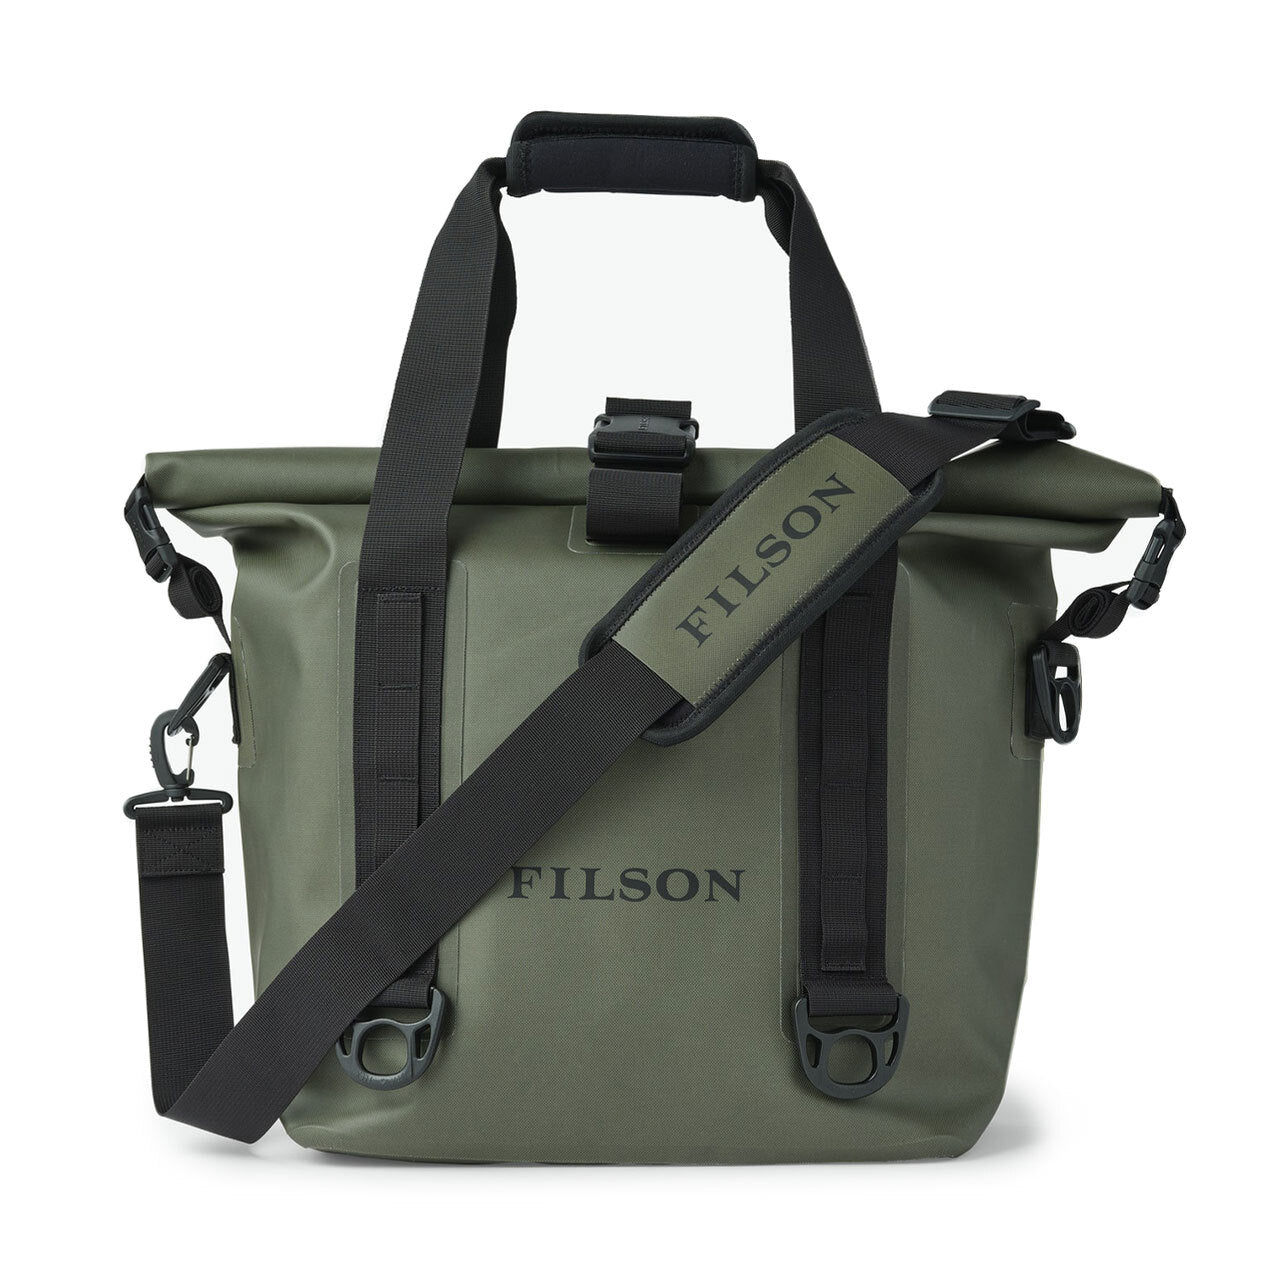 Filson Roll Top Dry Tote